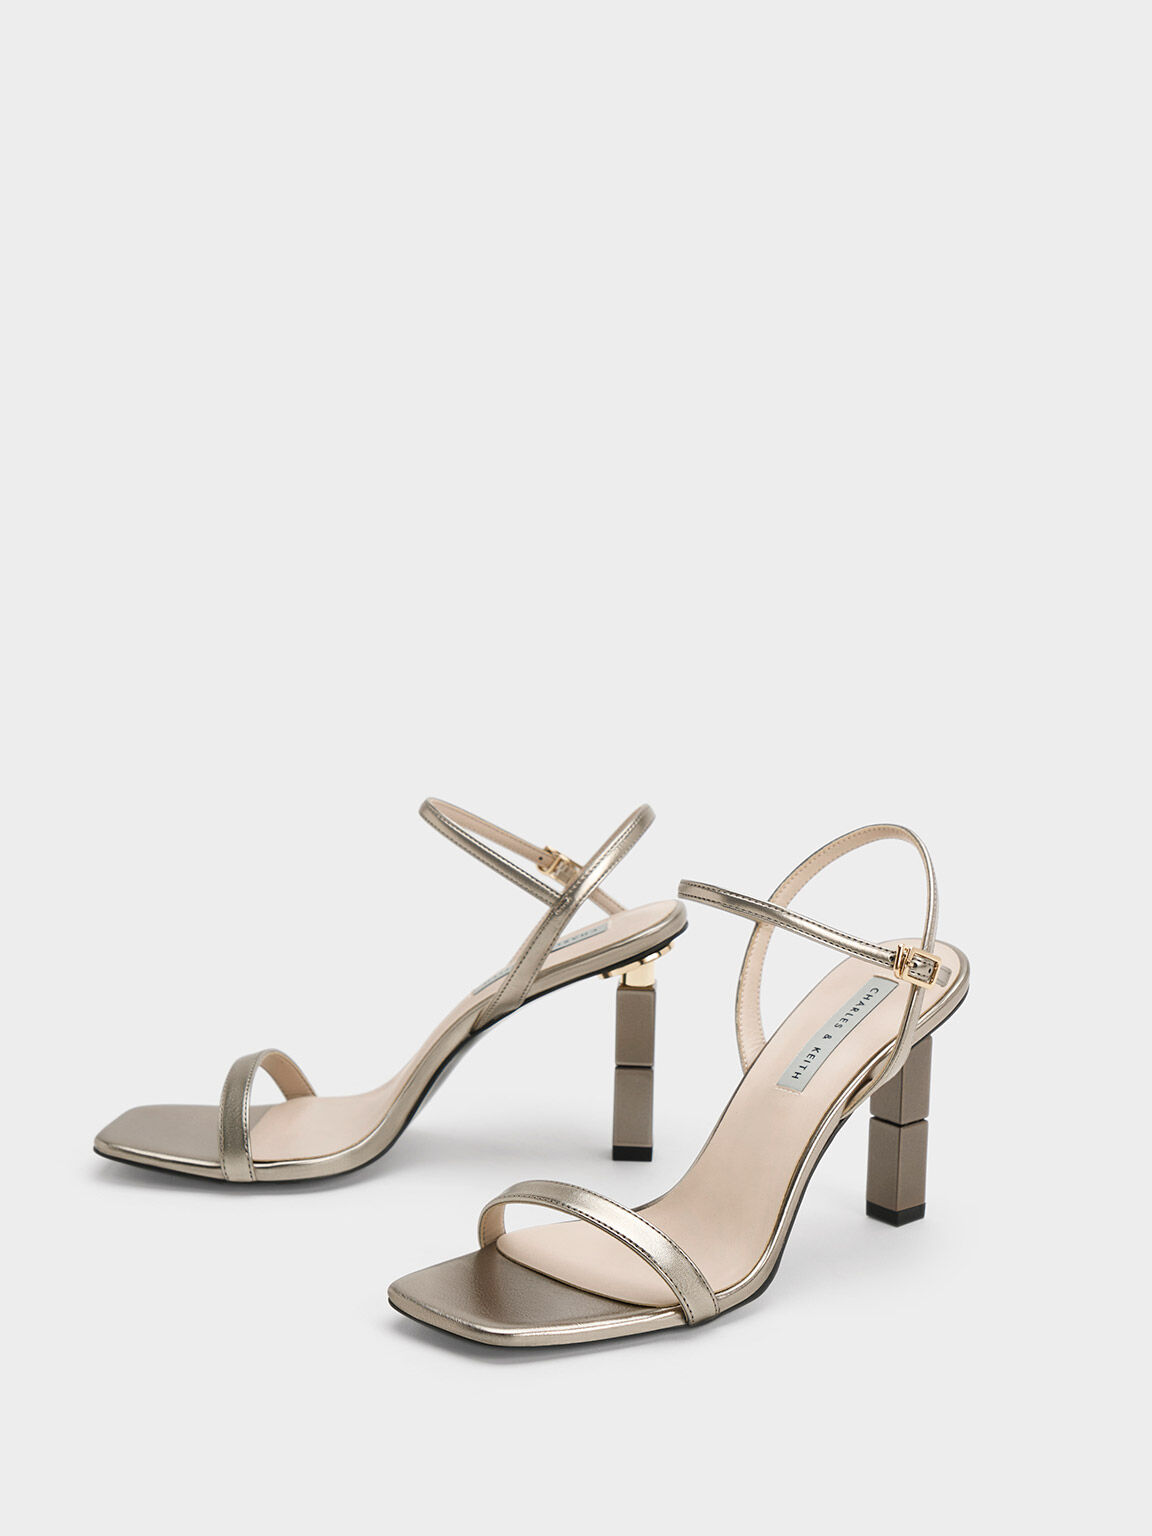 Charles And Keith Heels - Buy Charles And Keith Heels online in India